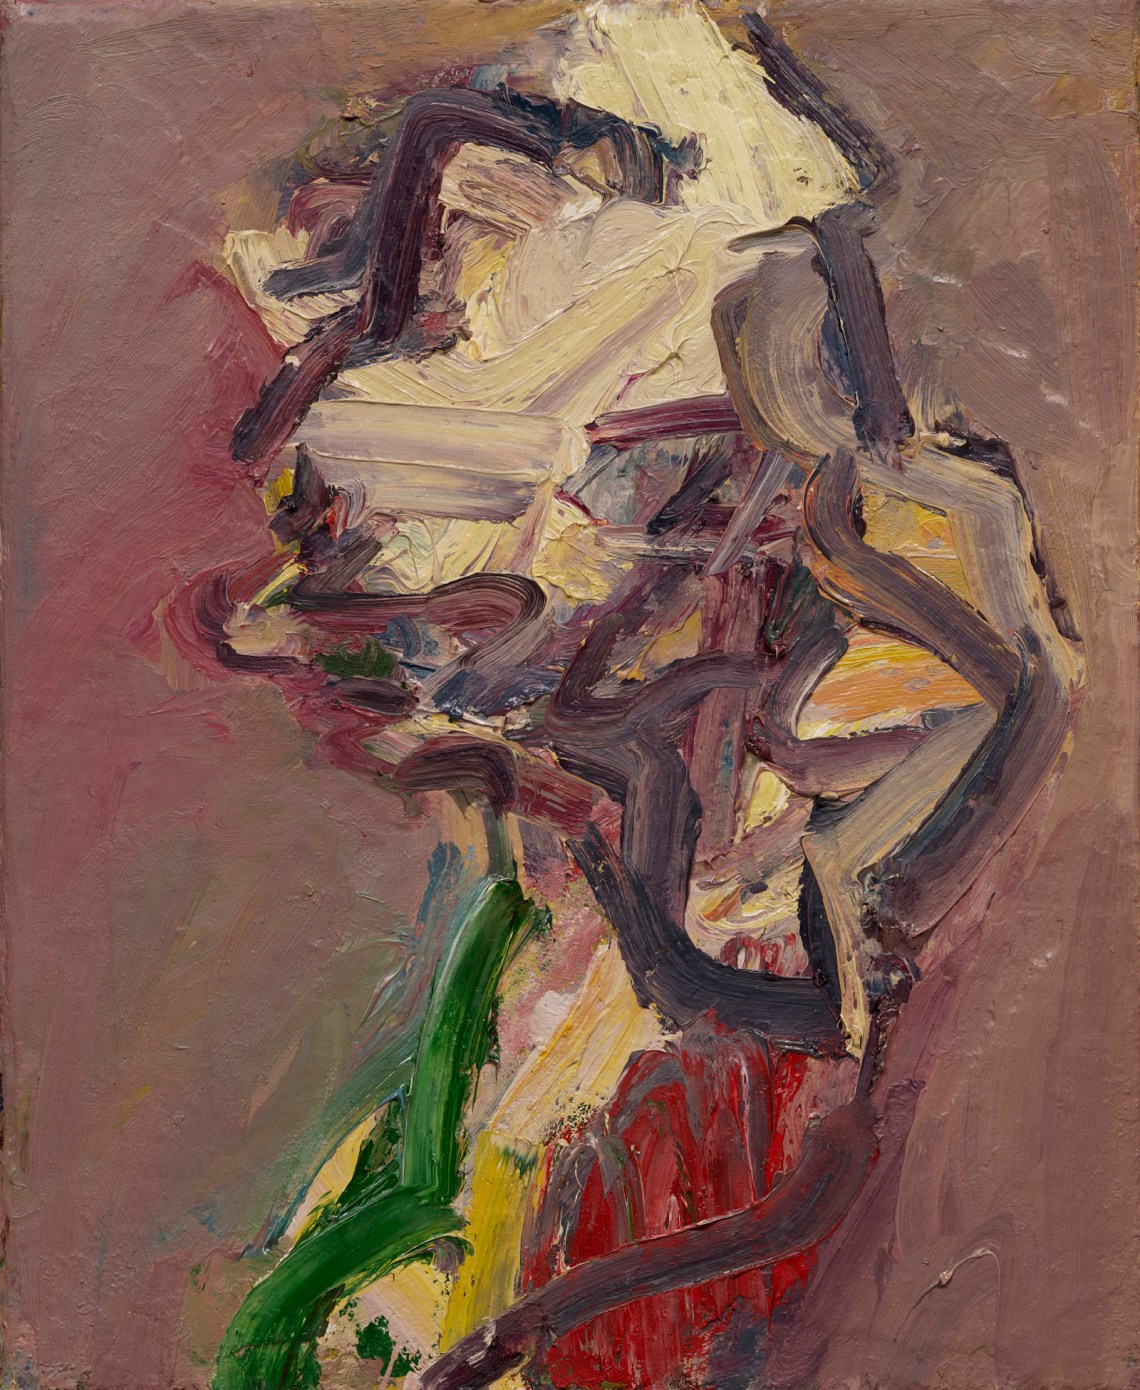 Catherine Lampert—Profile; painting by Frank Auerbach